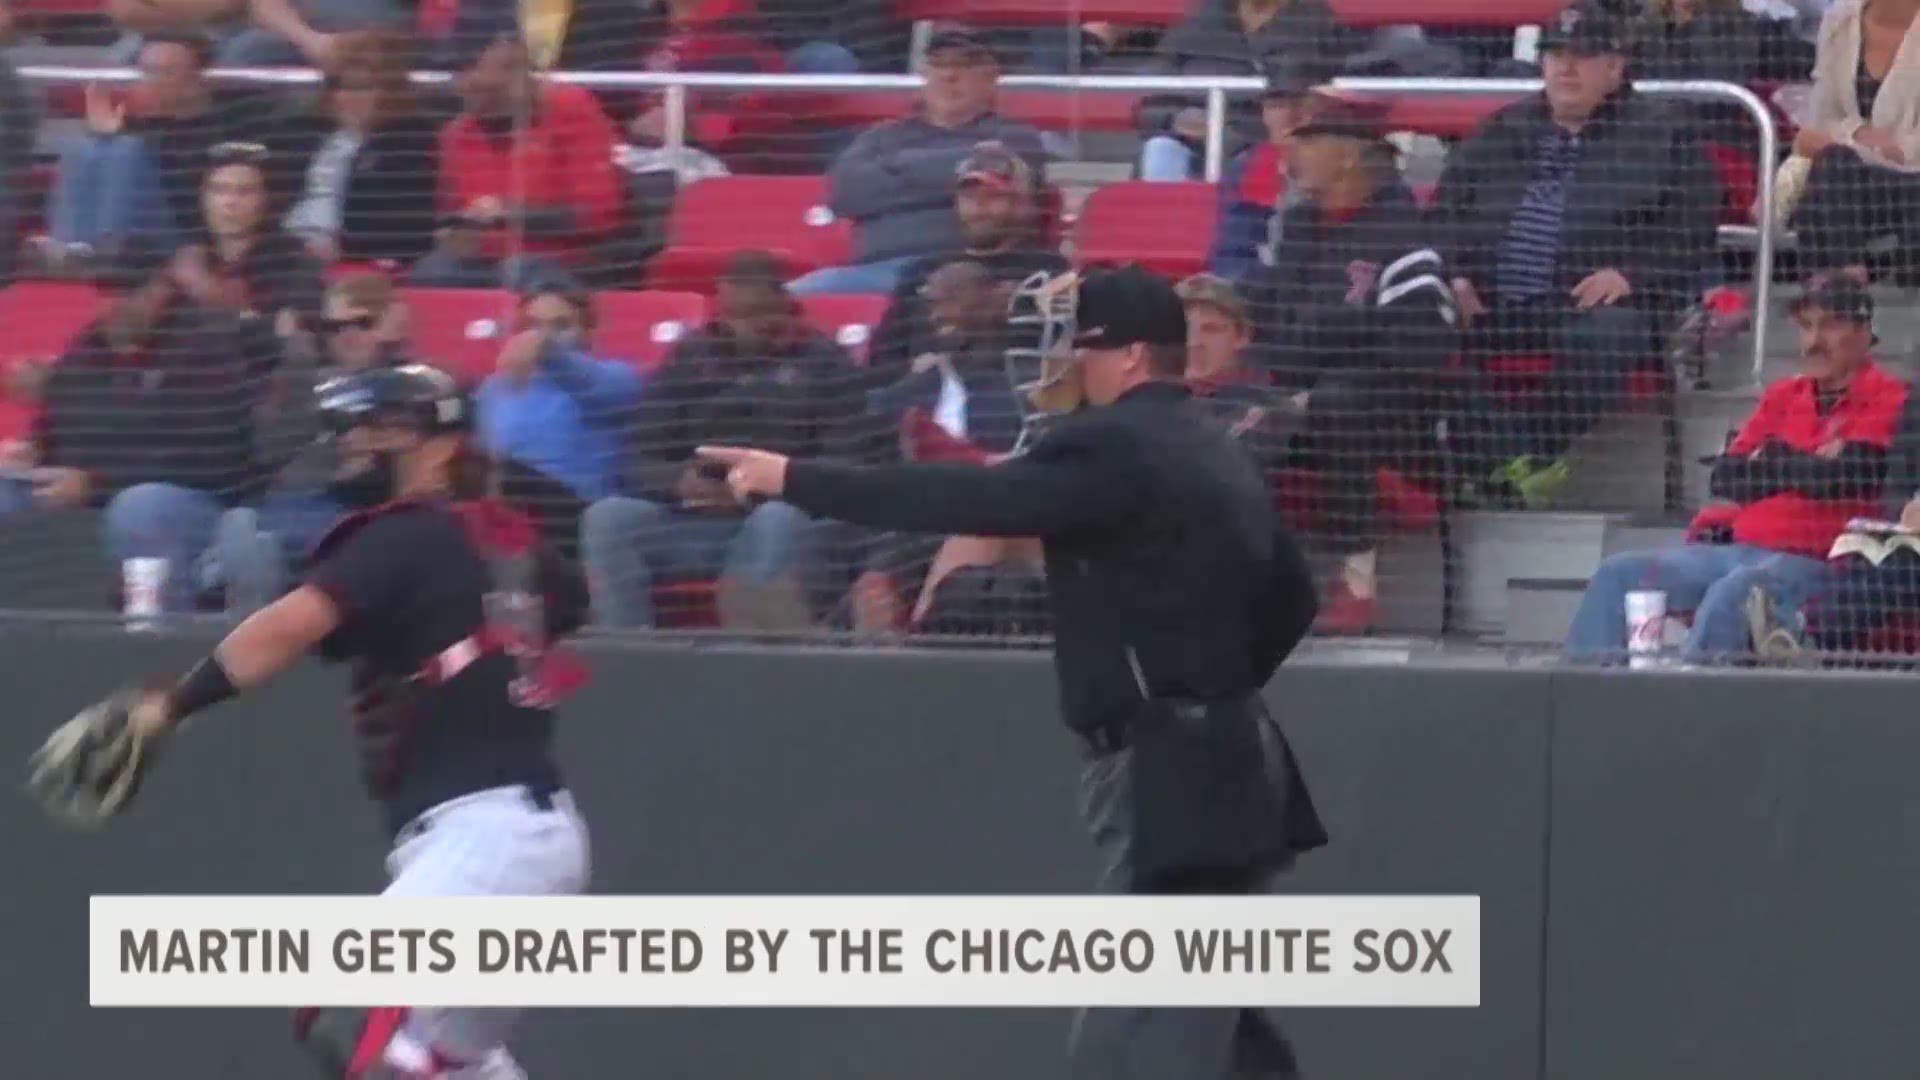 The Central grad will now have to decide if he will sign a contract with the White Sox.